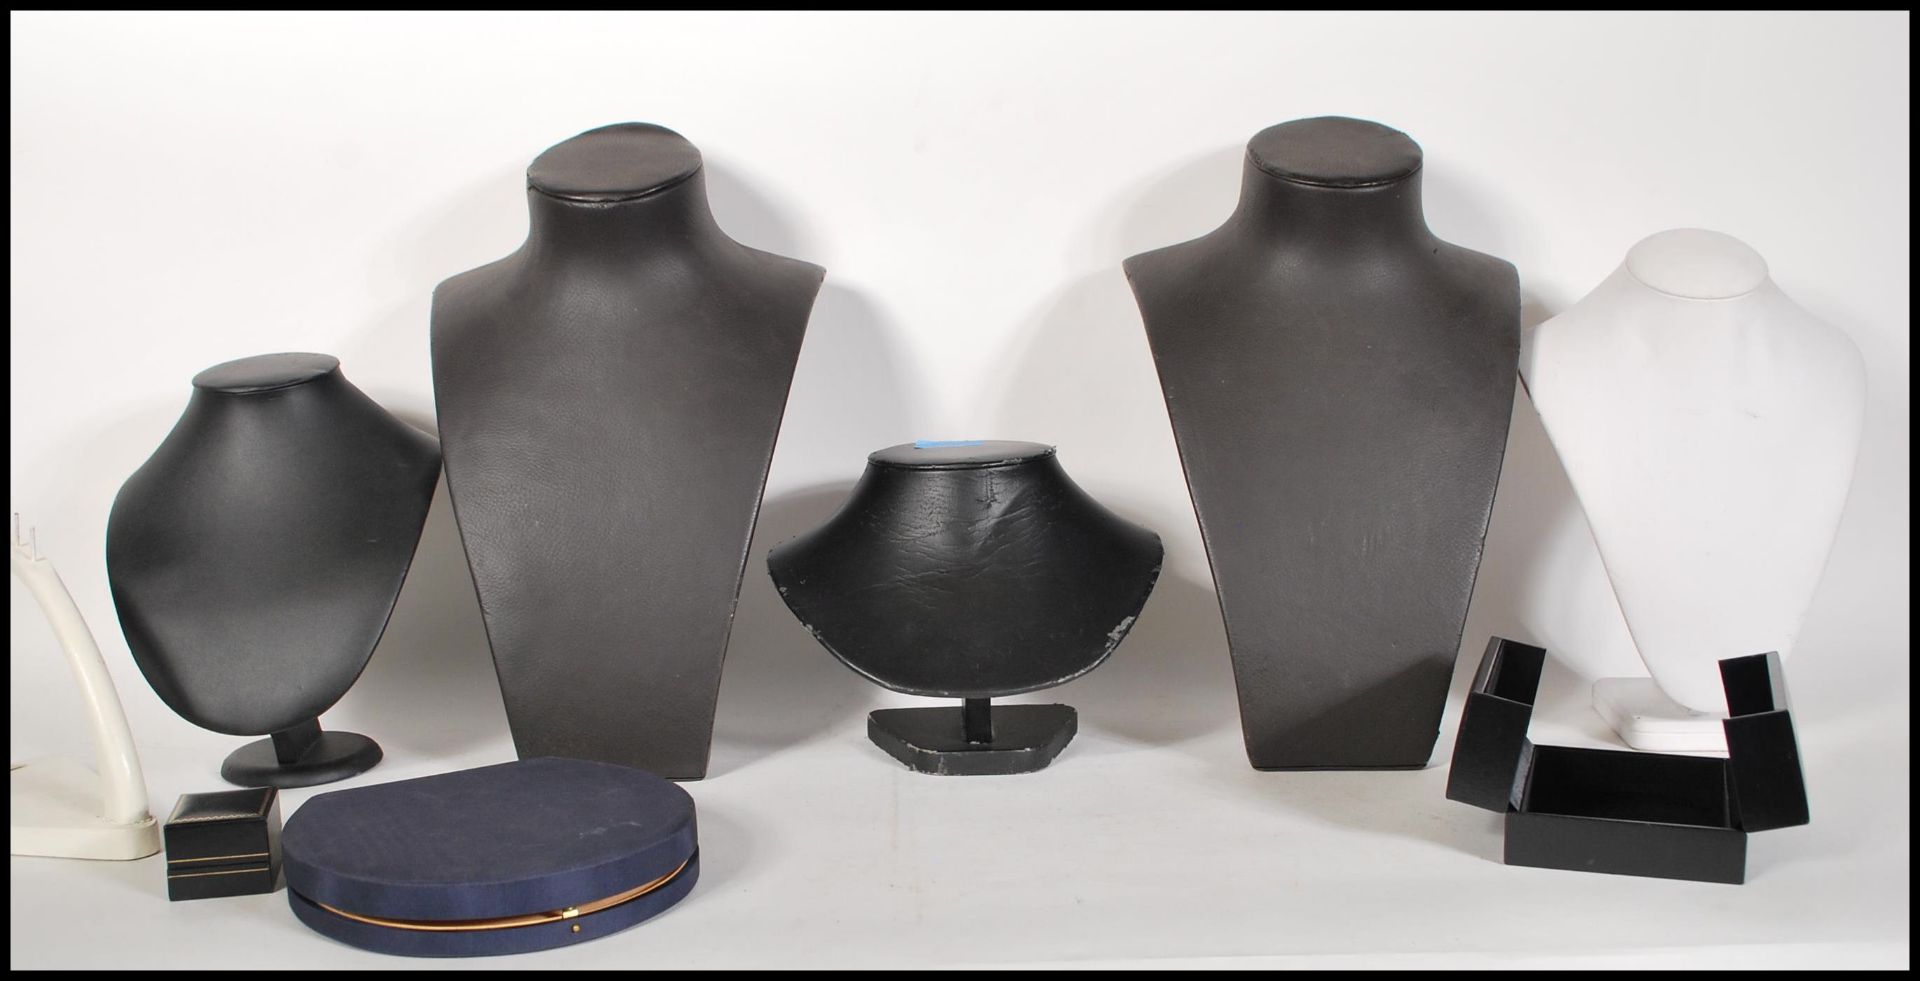 A collection of jewellery necklace counter top display stands upholstered in black and white leather